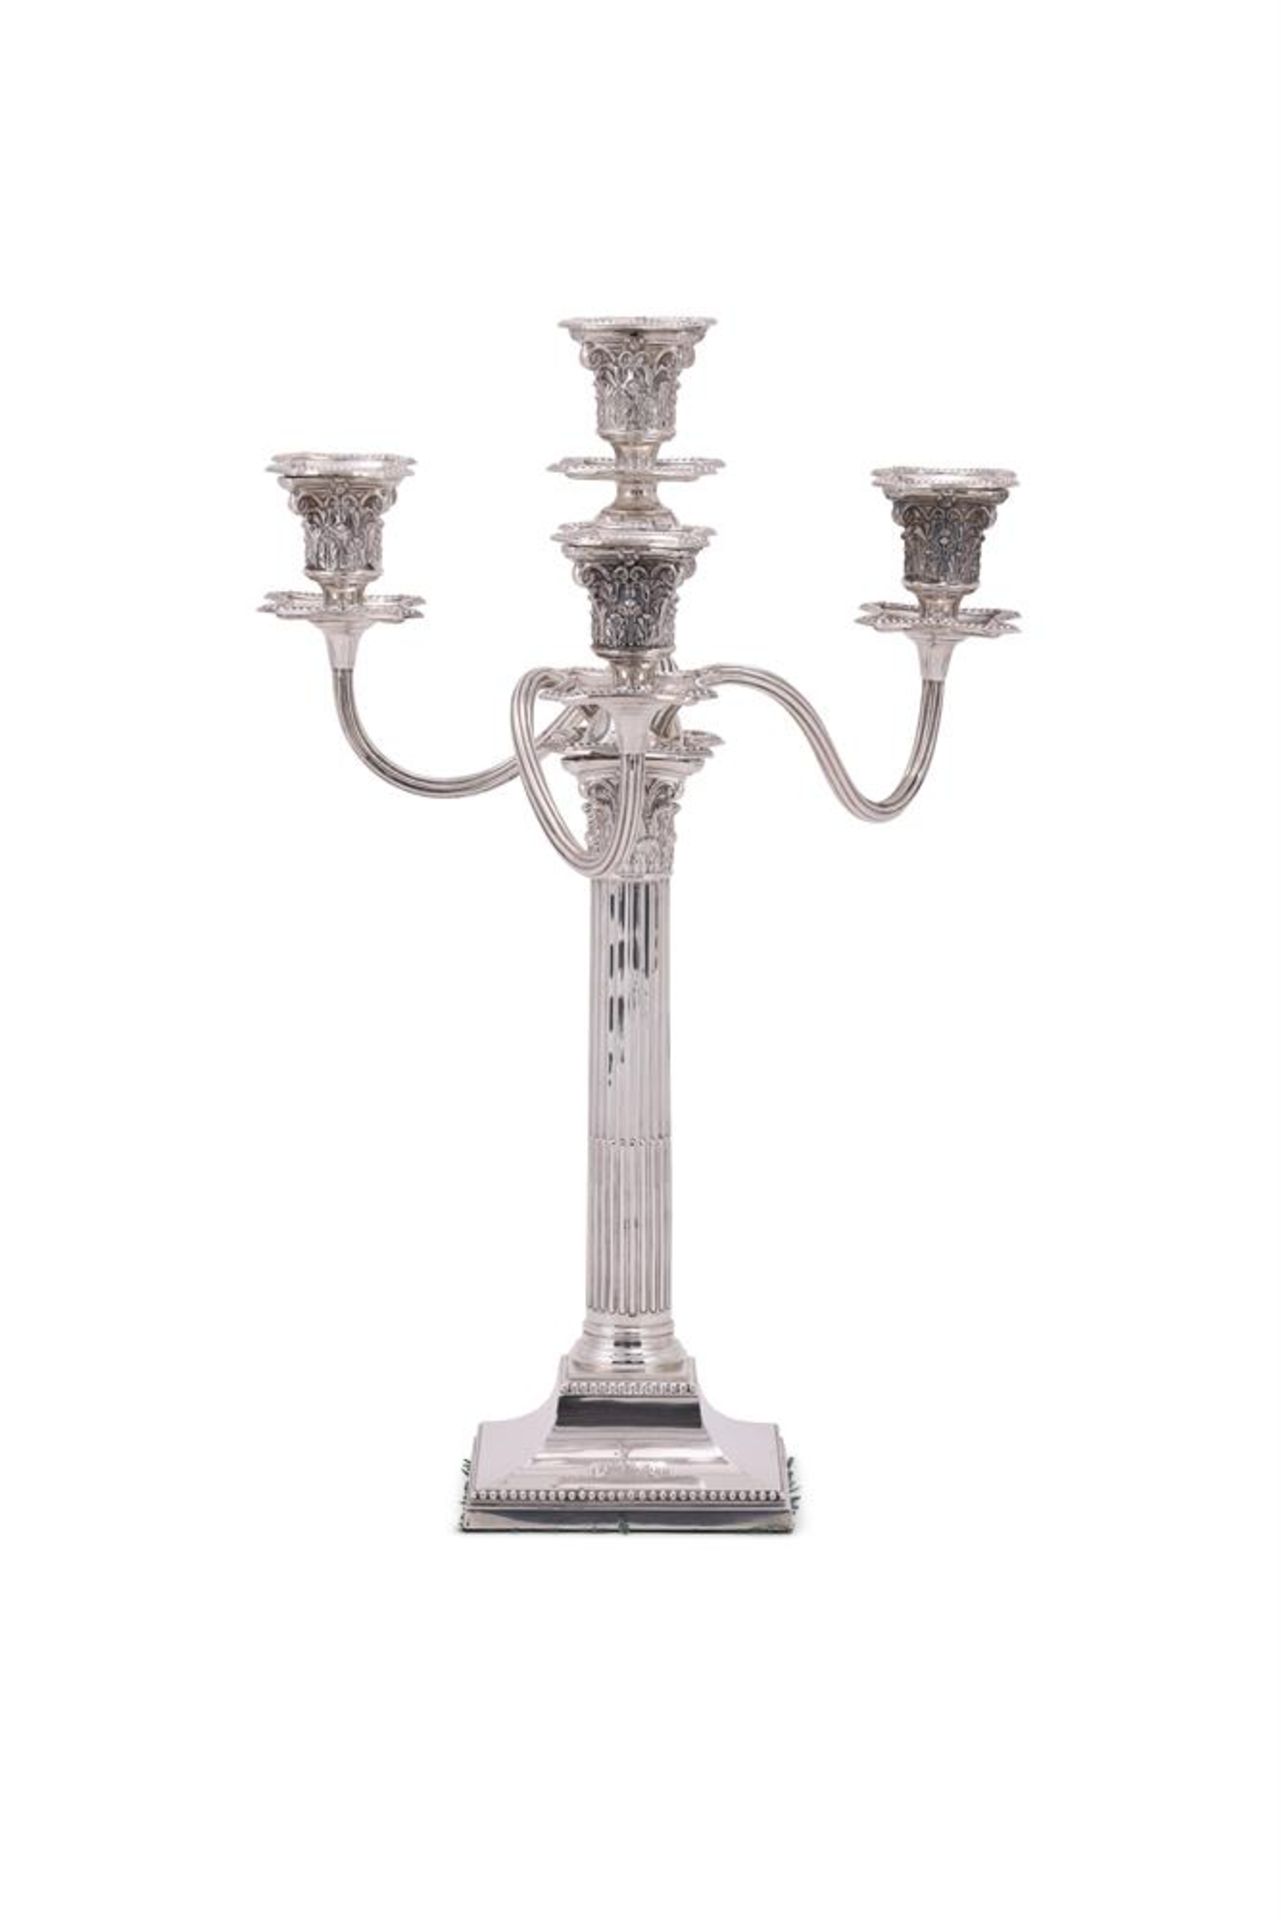 A VICTORIAN SILVER FOUR LIGHT CANDELABRUM - Image 2 of 4